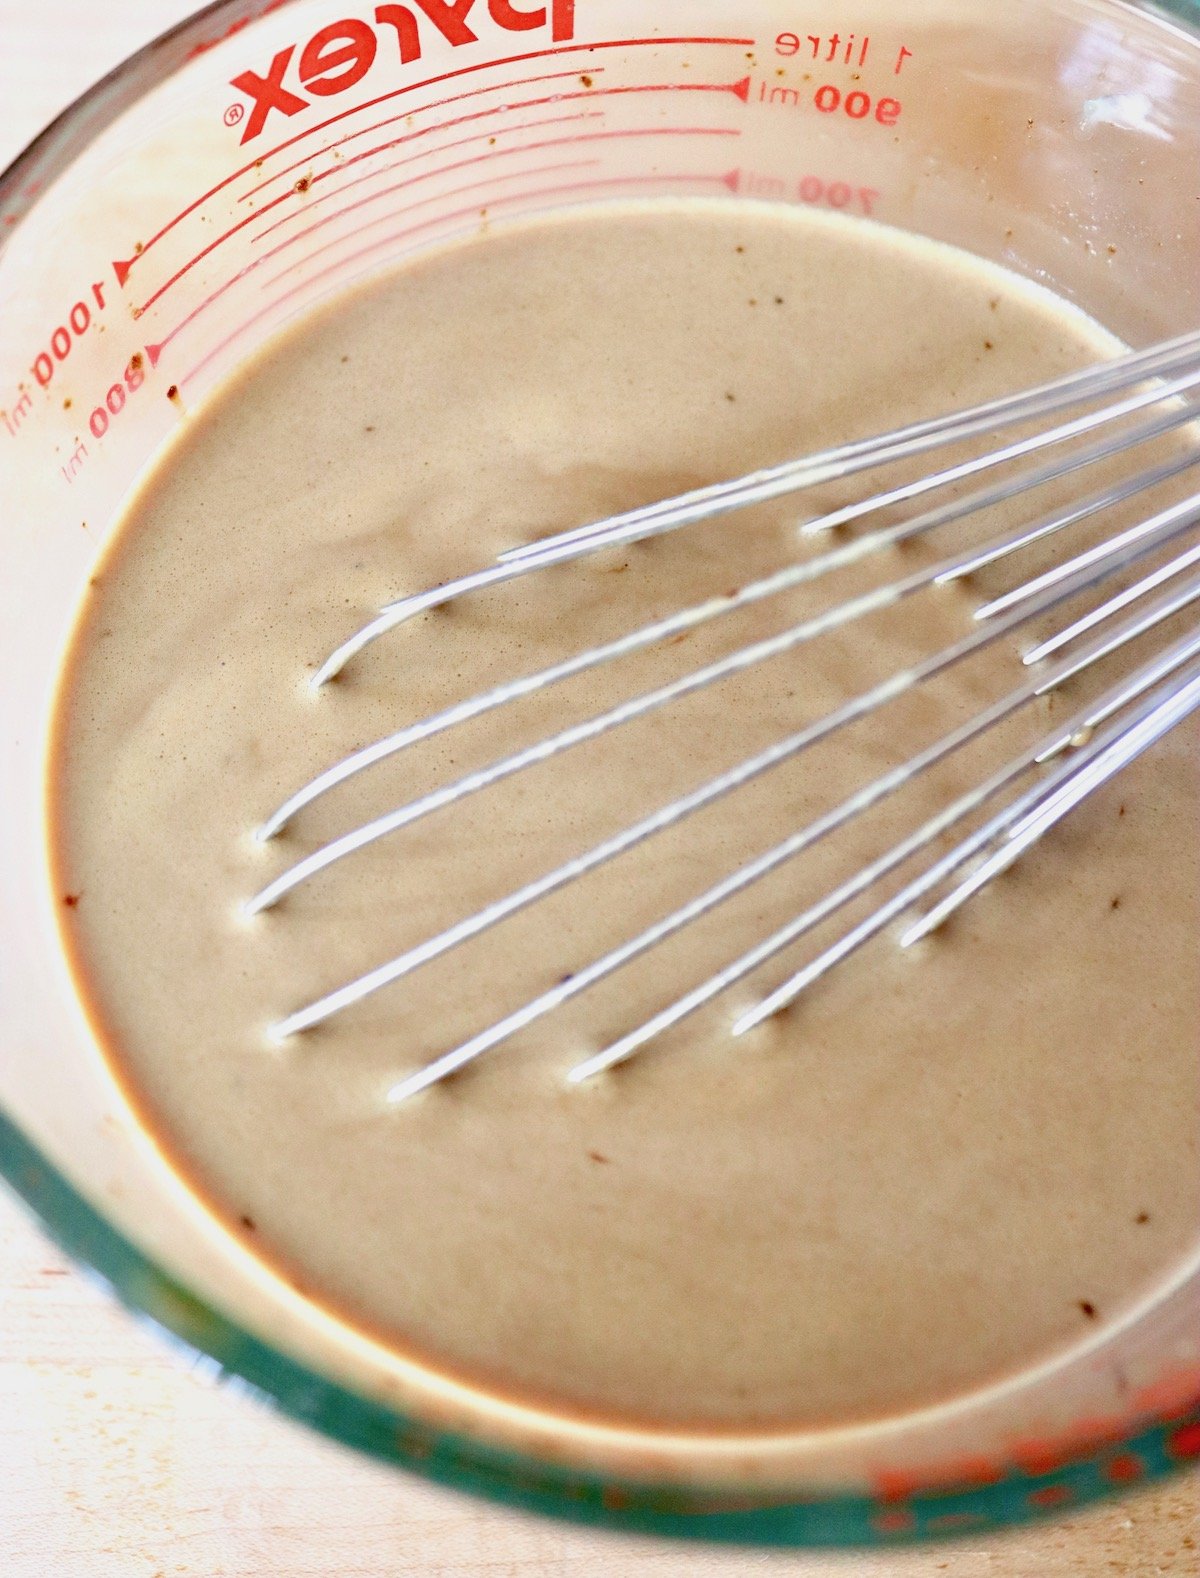 Creamy coffee mixture in a pyrex measuring glass with a whisk.